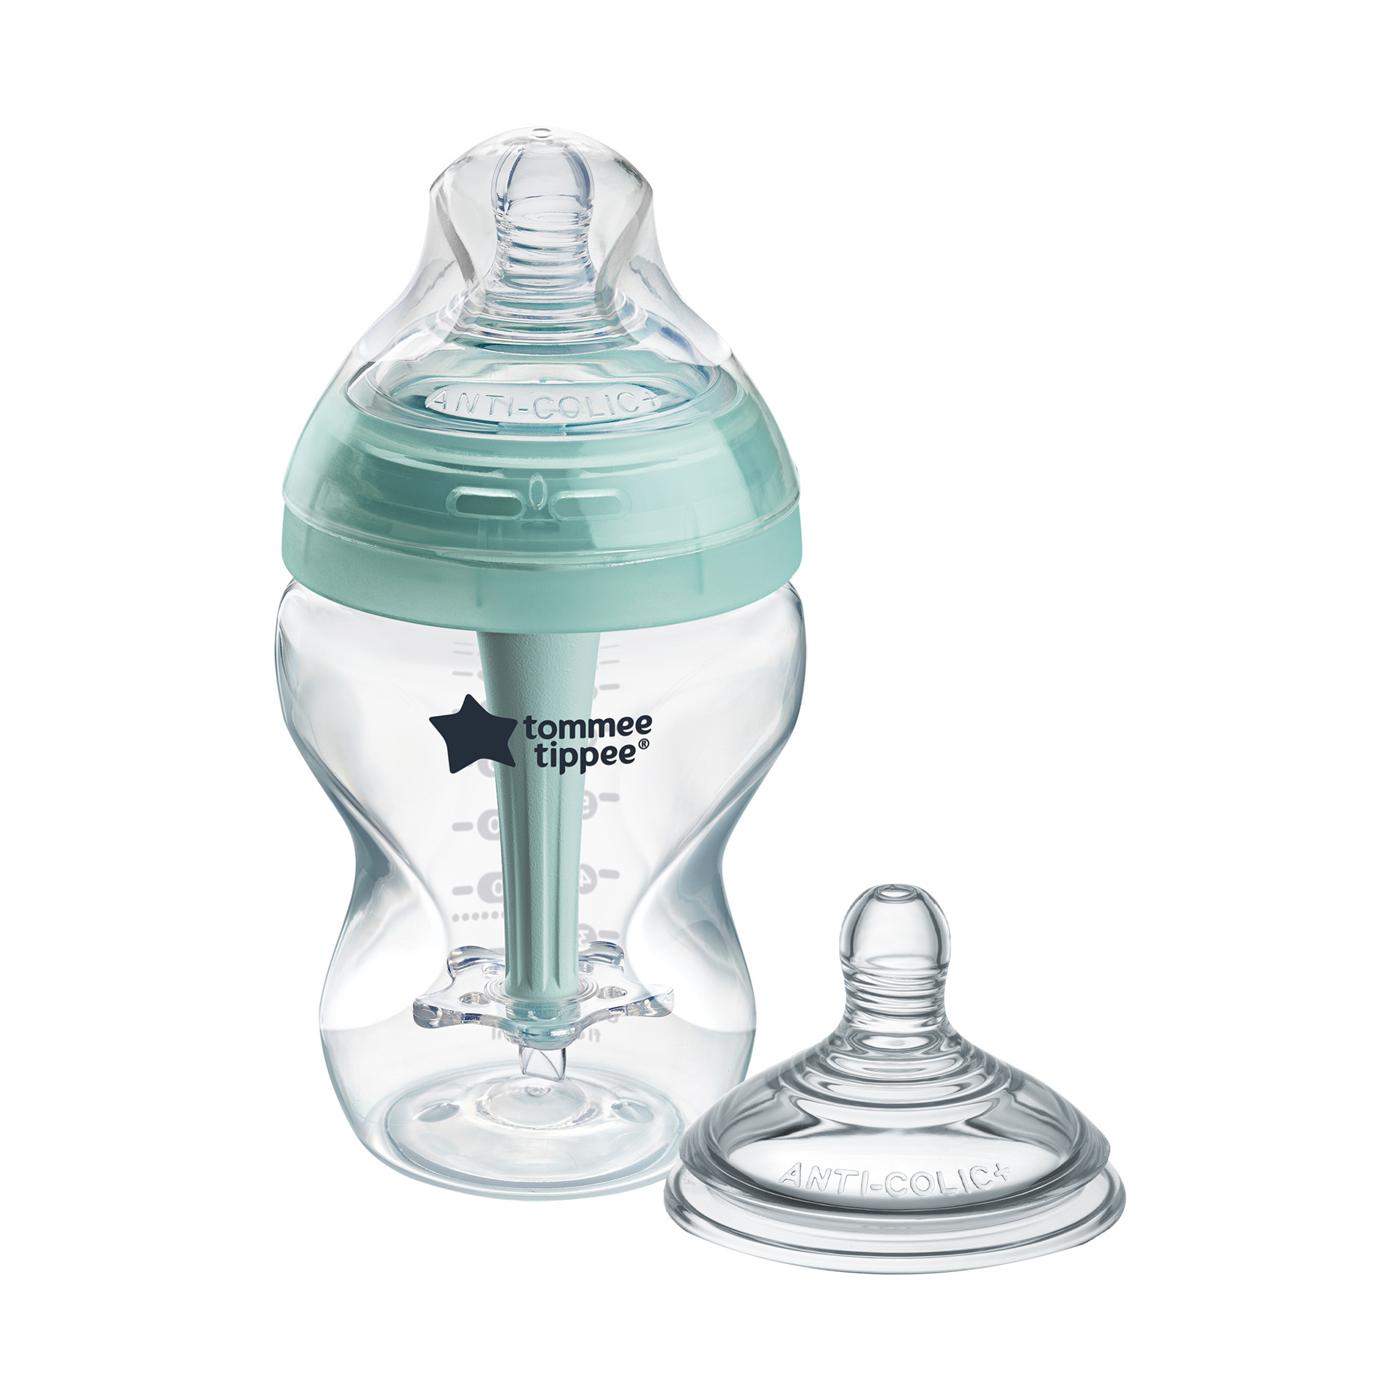 Tommee Tippee Advanced Anti-Colic Bottle - Clear; image 3 of 3